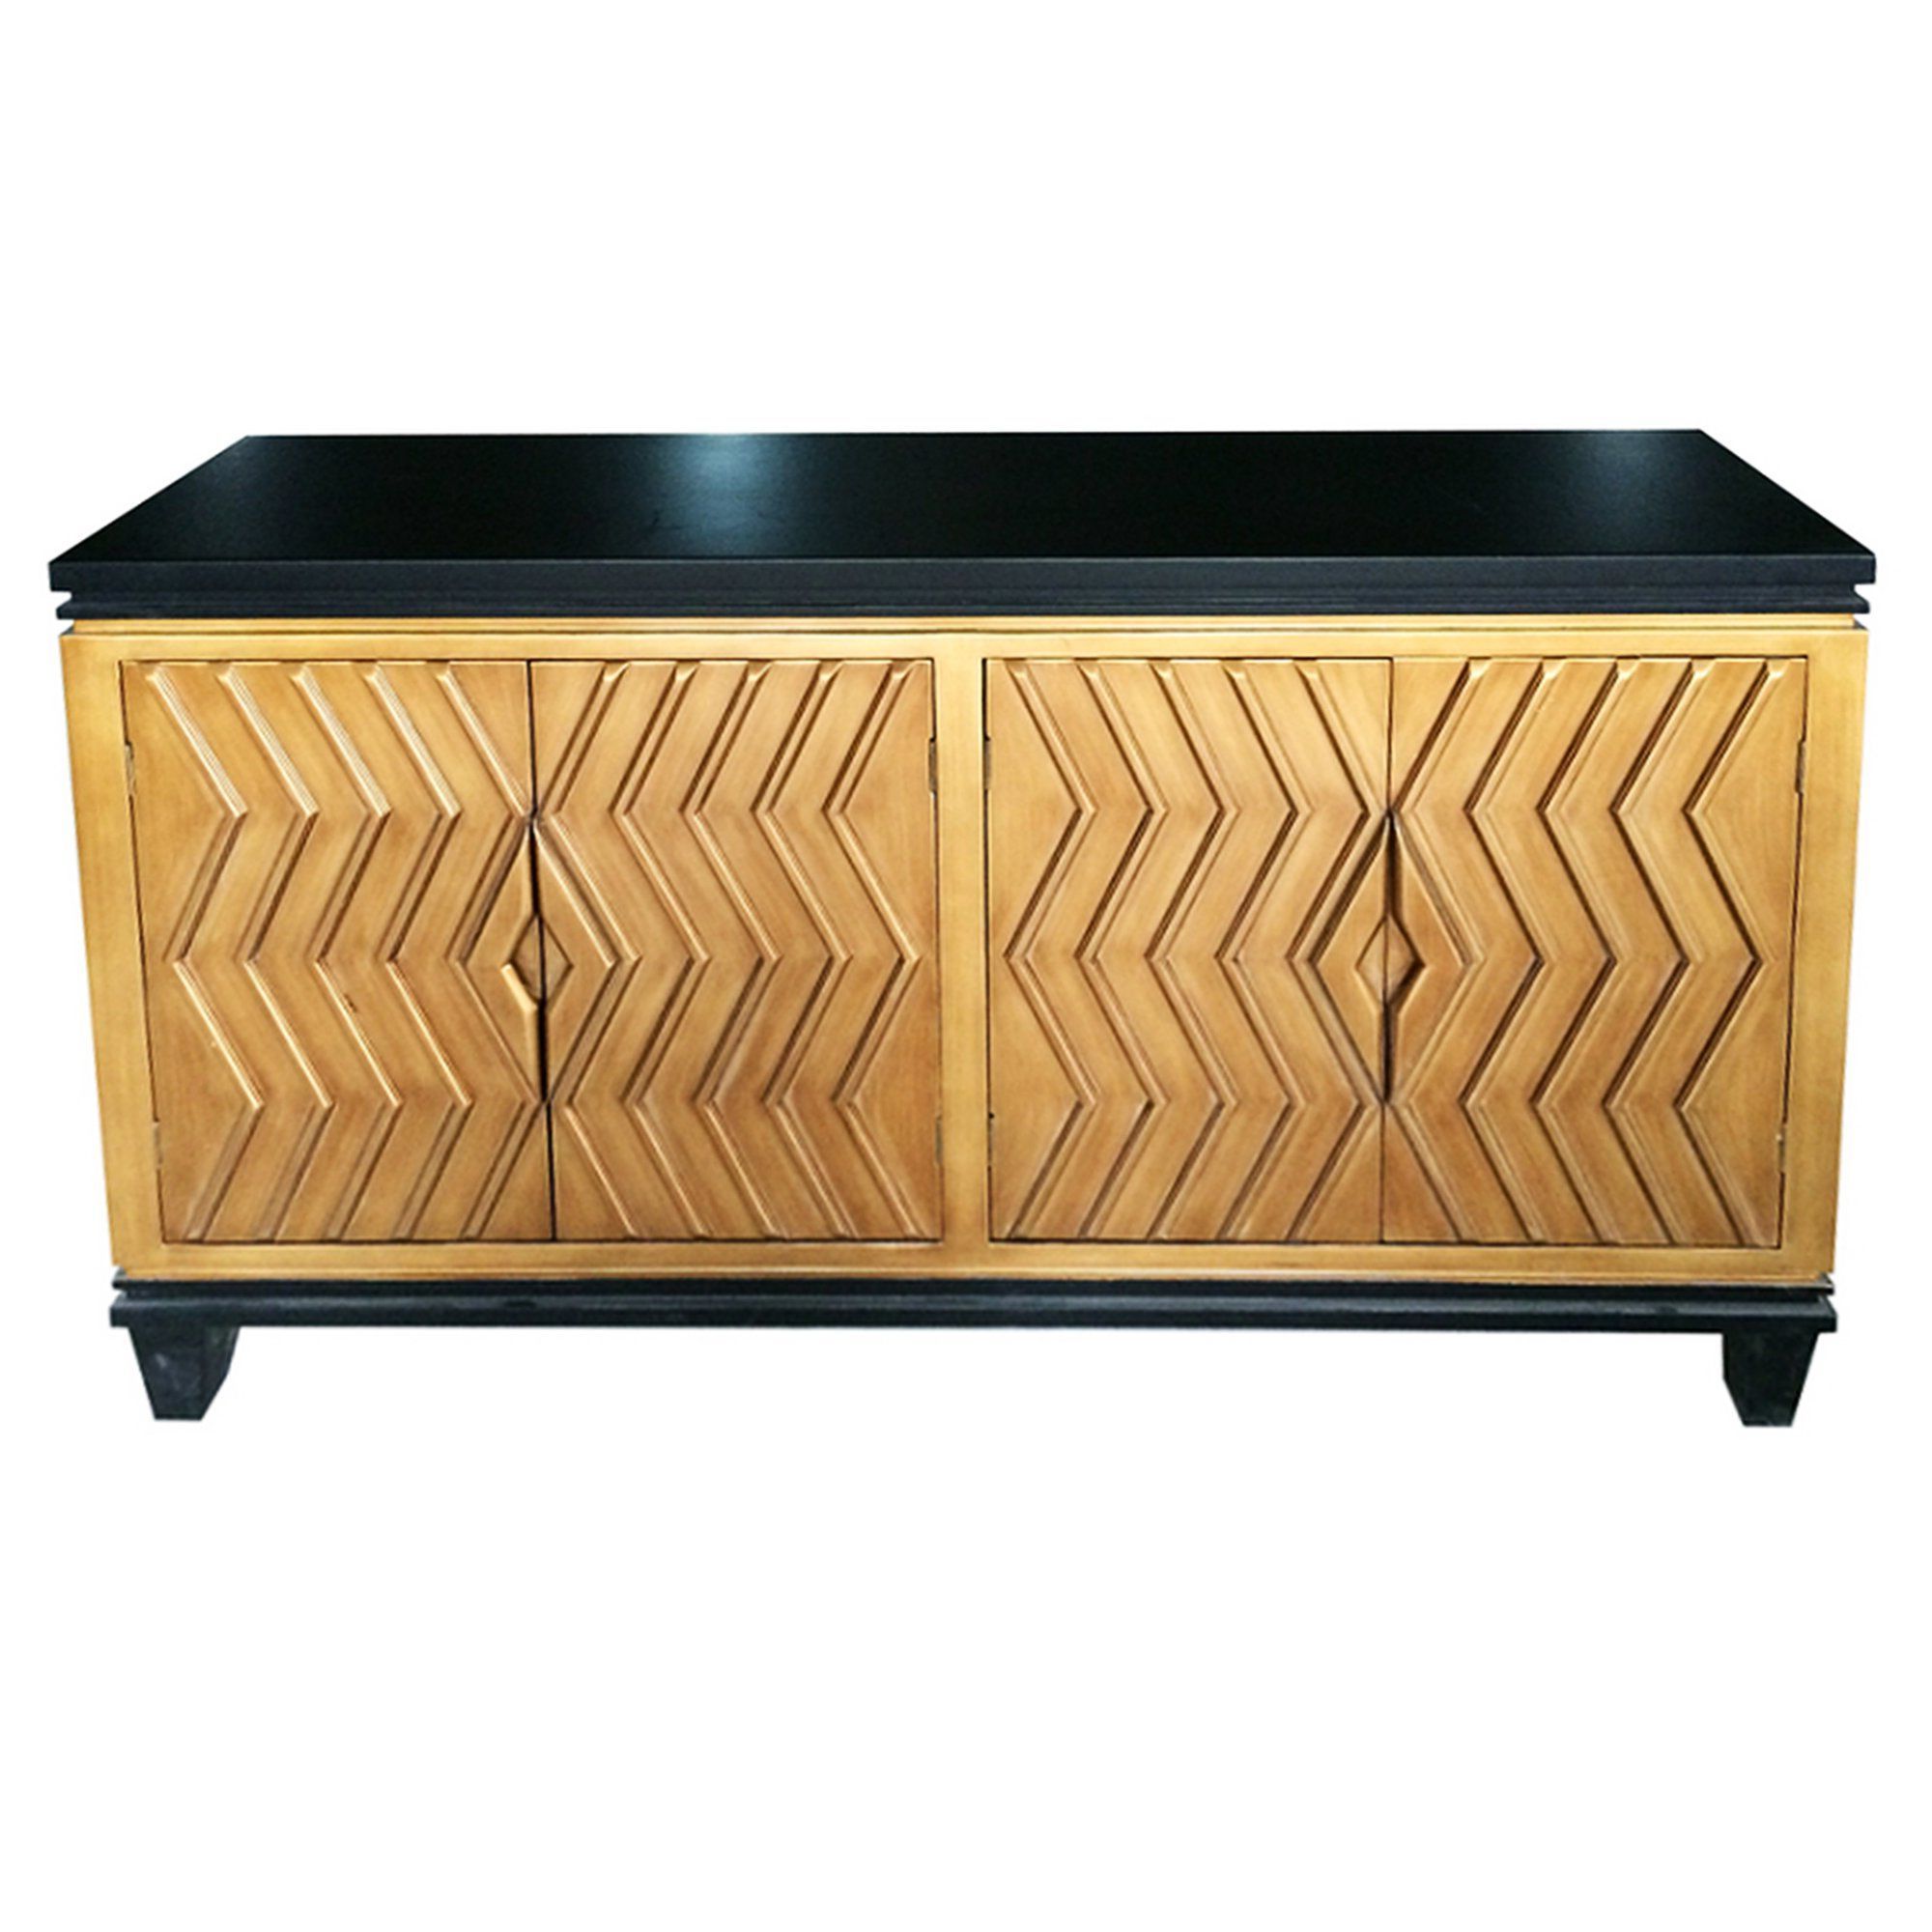 Armelle Sideboard | Cynthia New Thoughts | Sideboard, Room With Armelle Sideboards (Gallery 2 of 20)